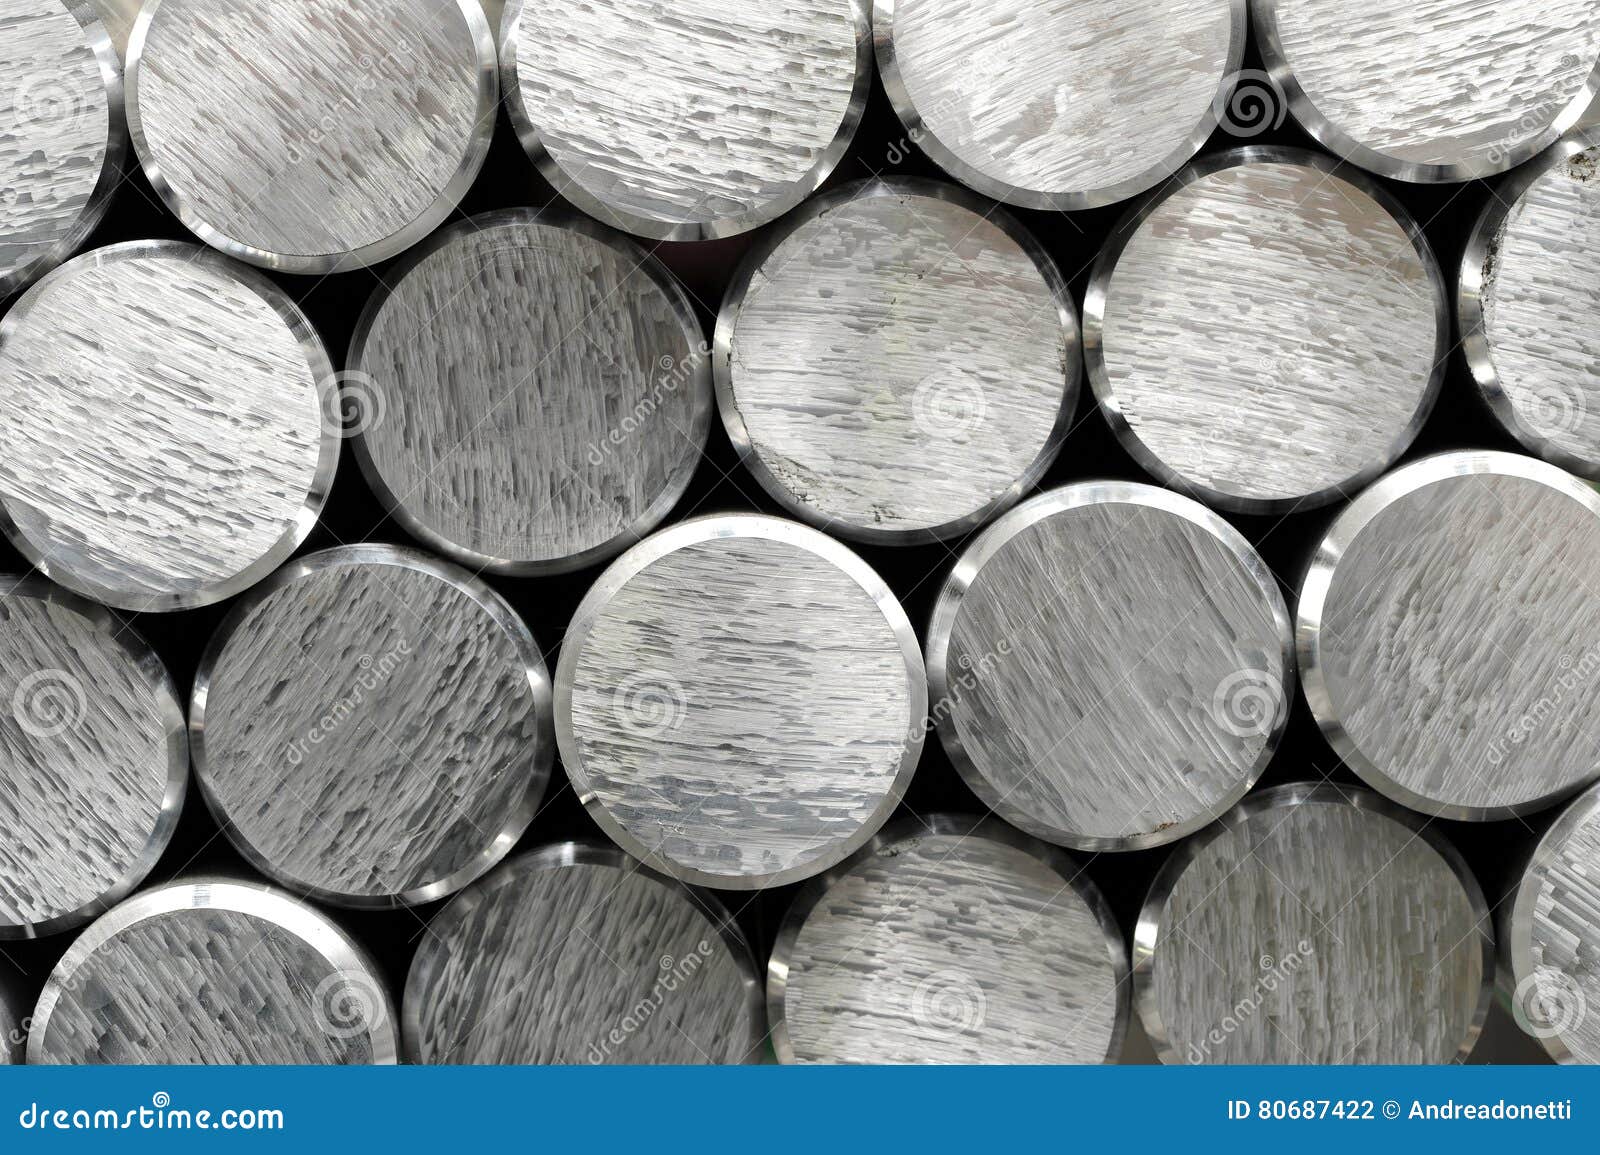 background texture and pattern of aluminium bars